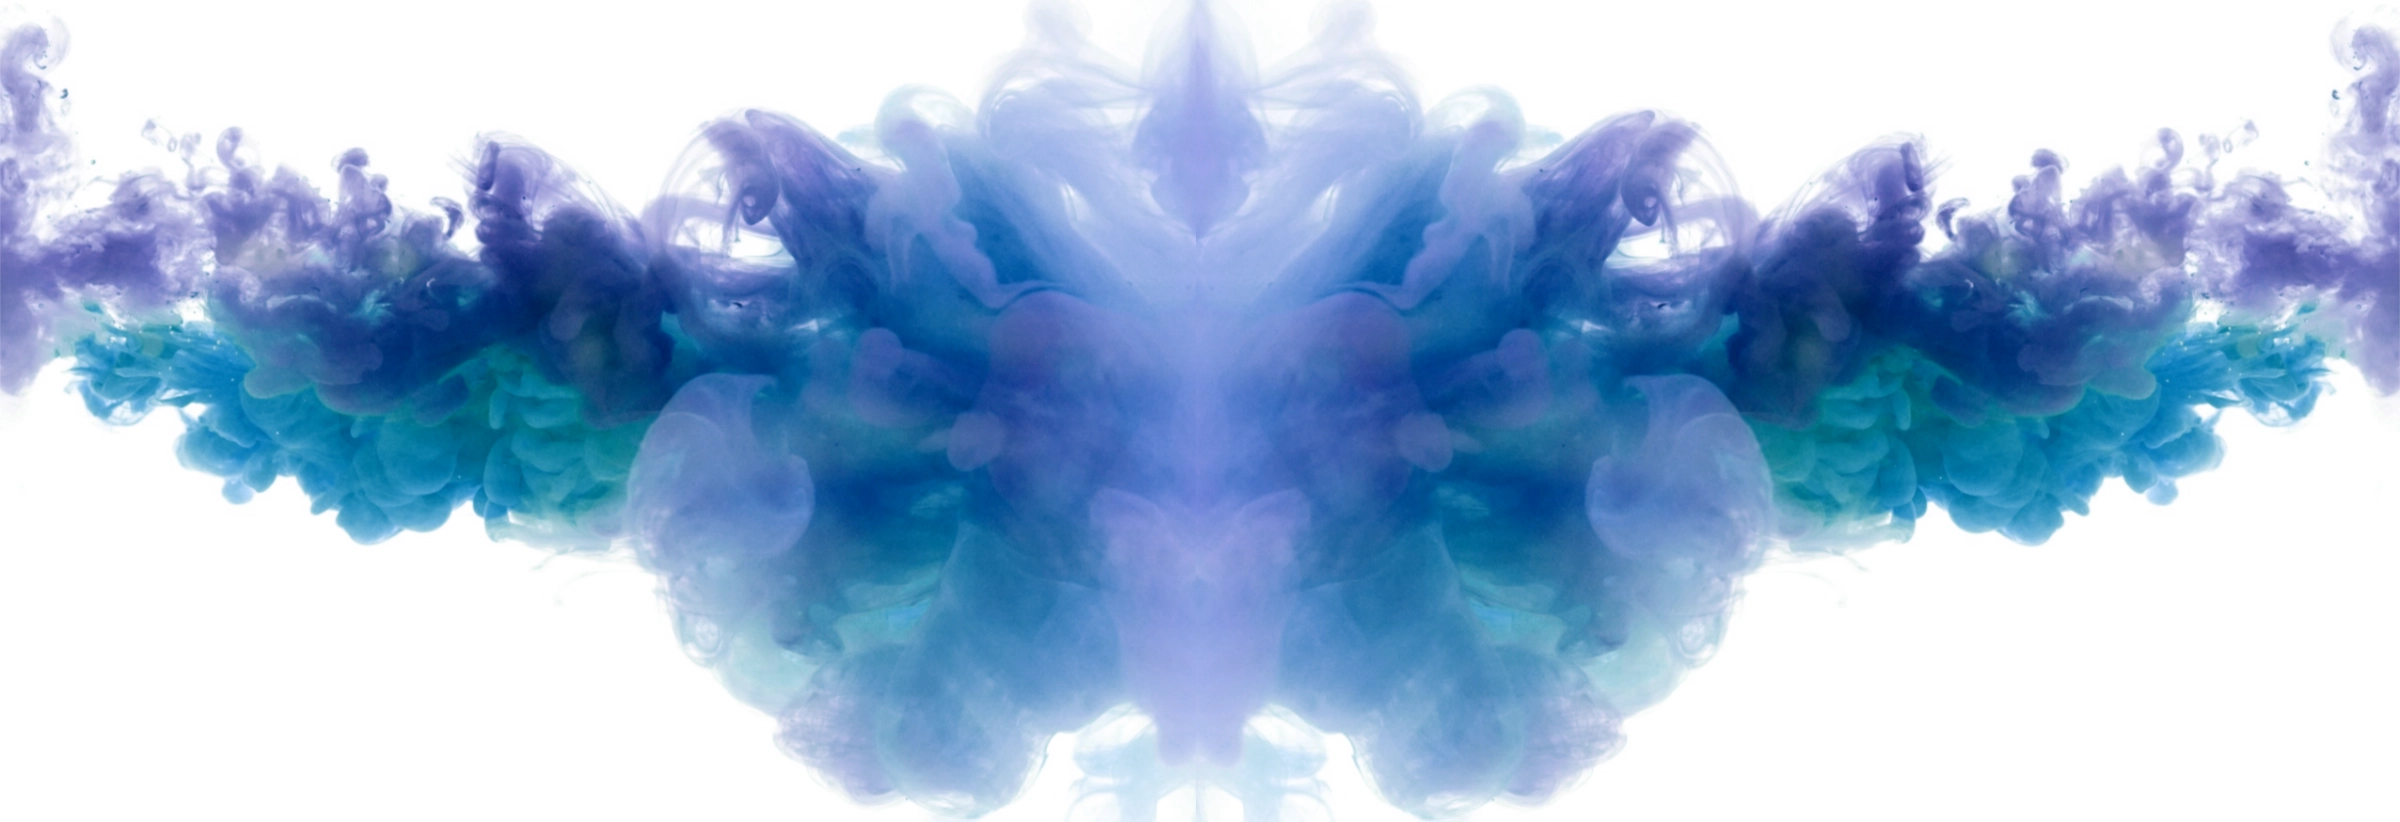 103-r307-blue-smoke-together-2-1566261712743.png